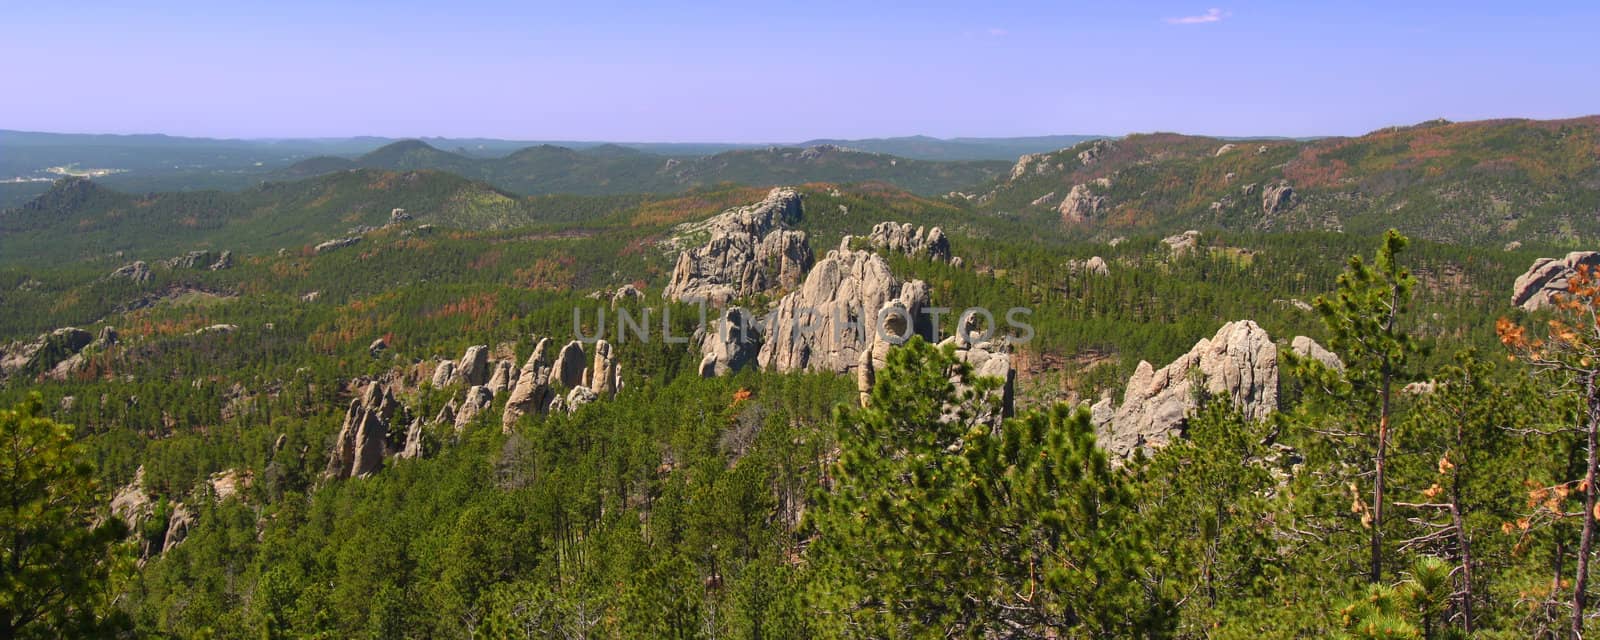 Needles Rock Formations by Wirepec